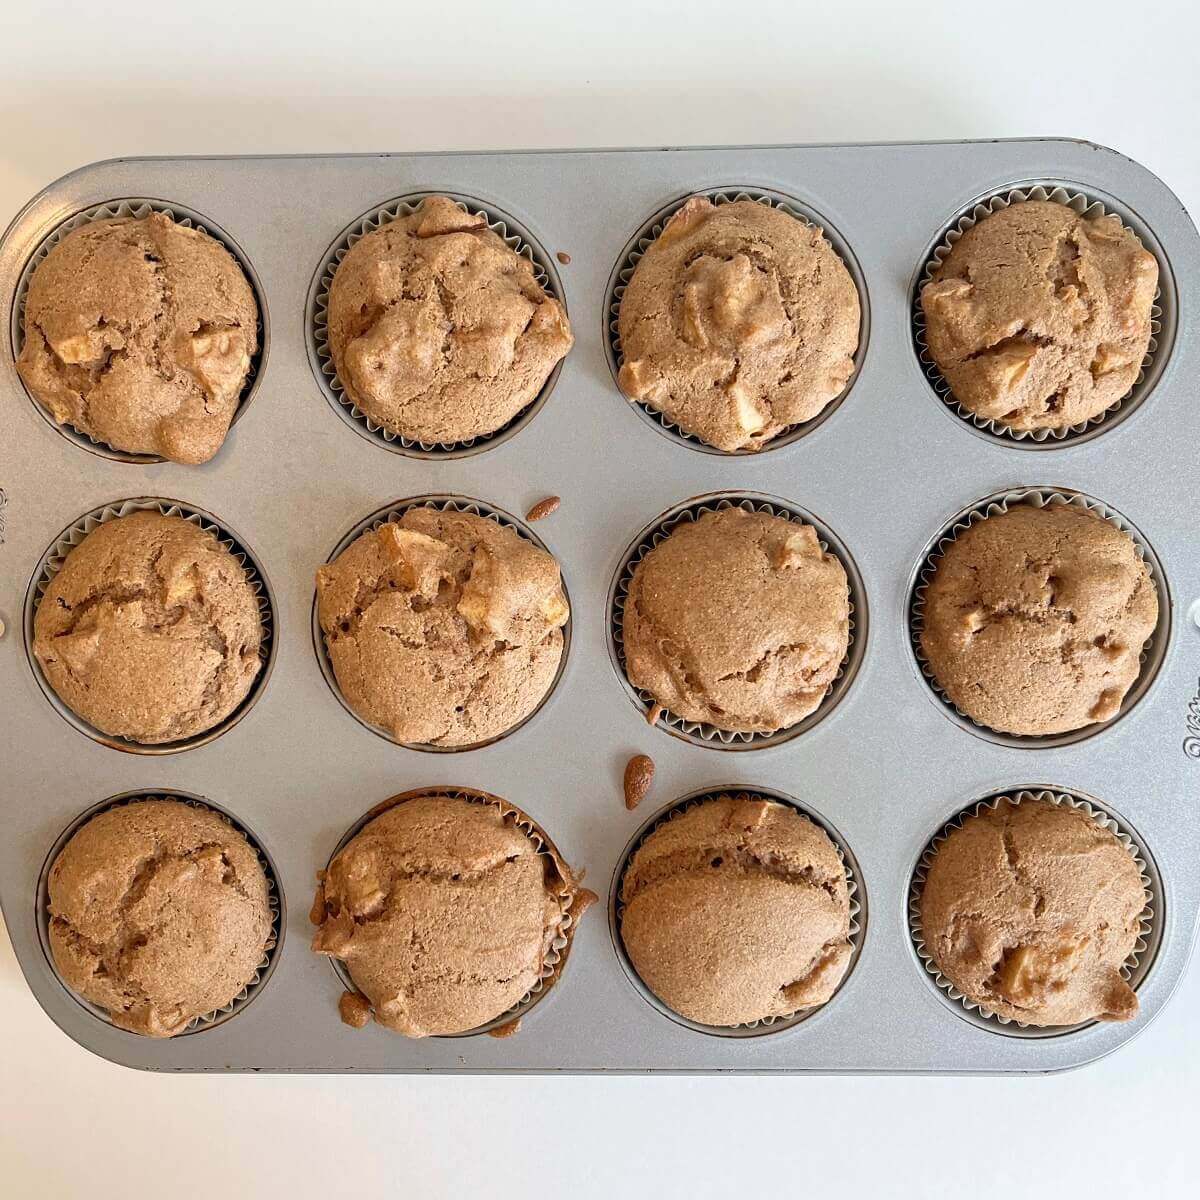 Warm muffins in a metal pan.